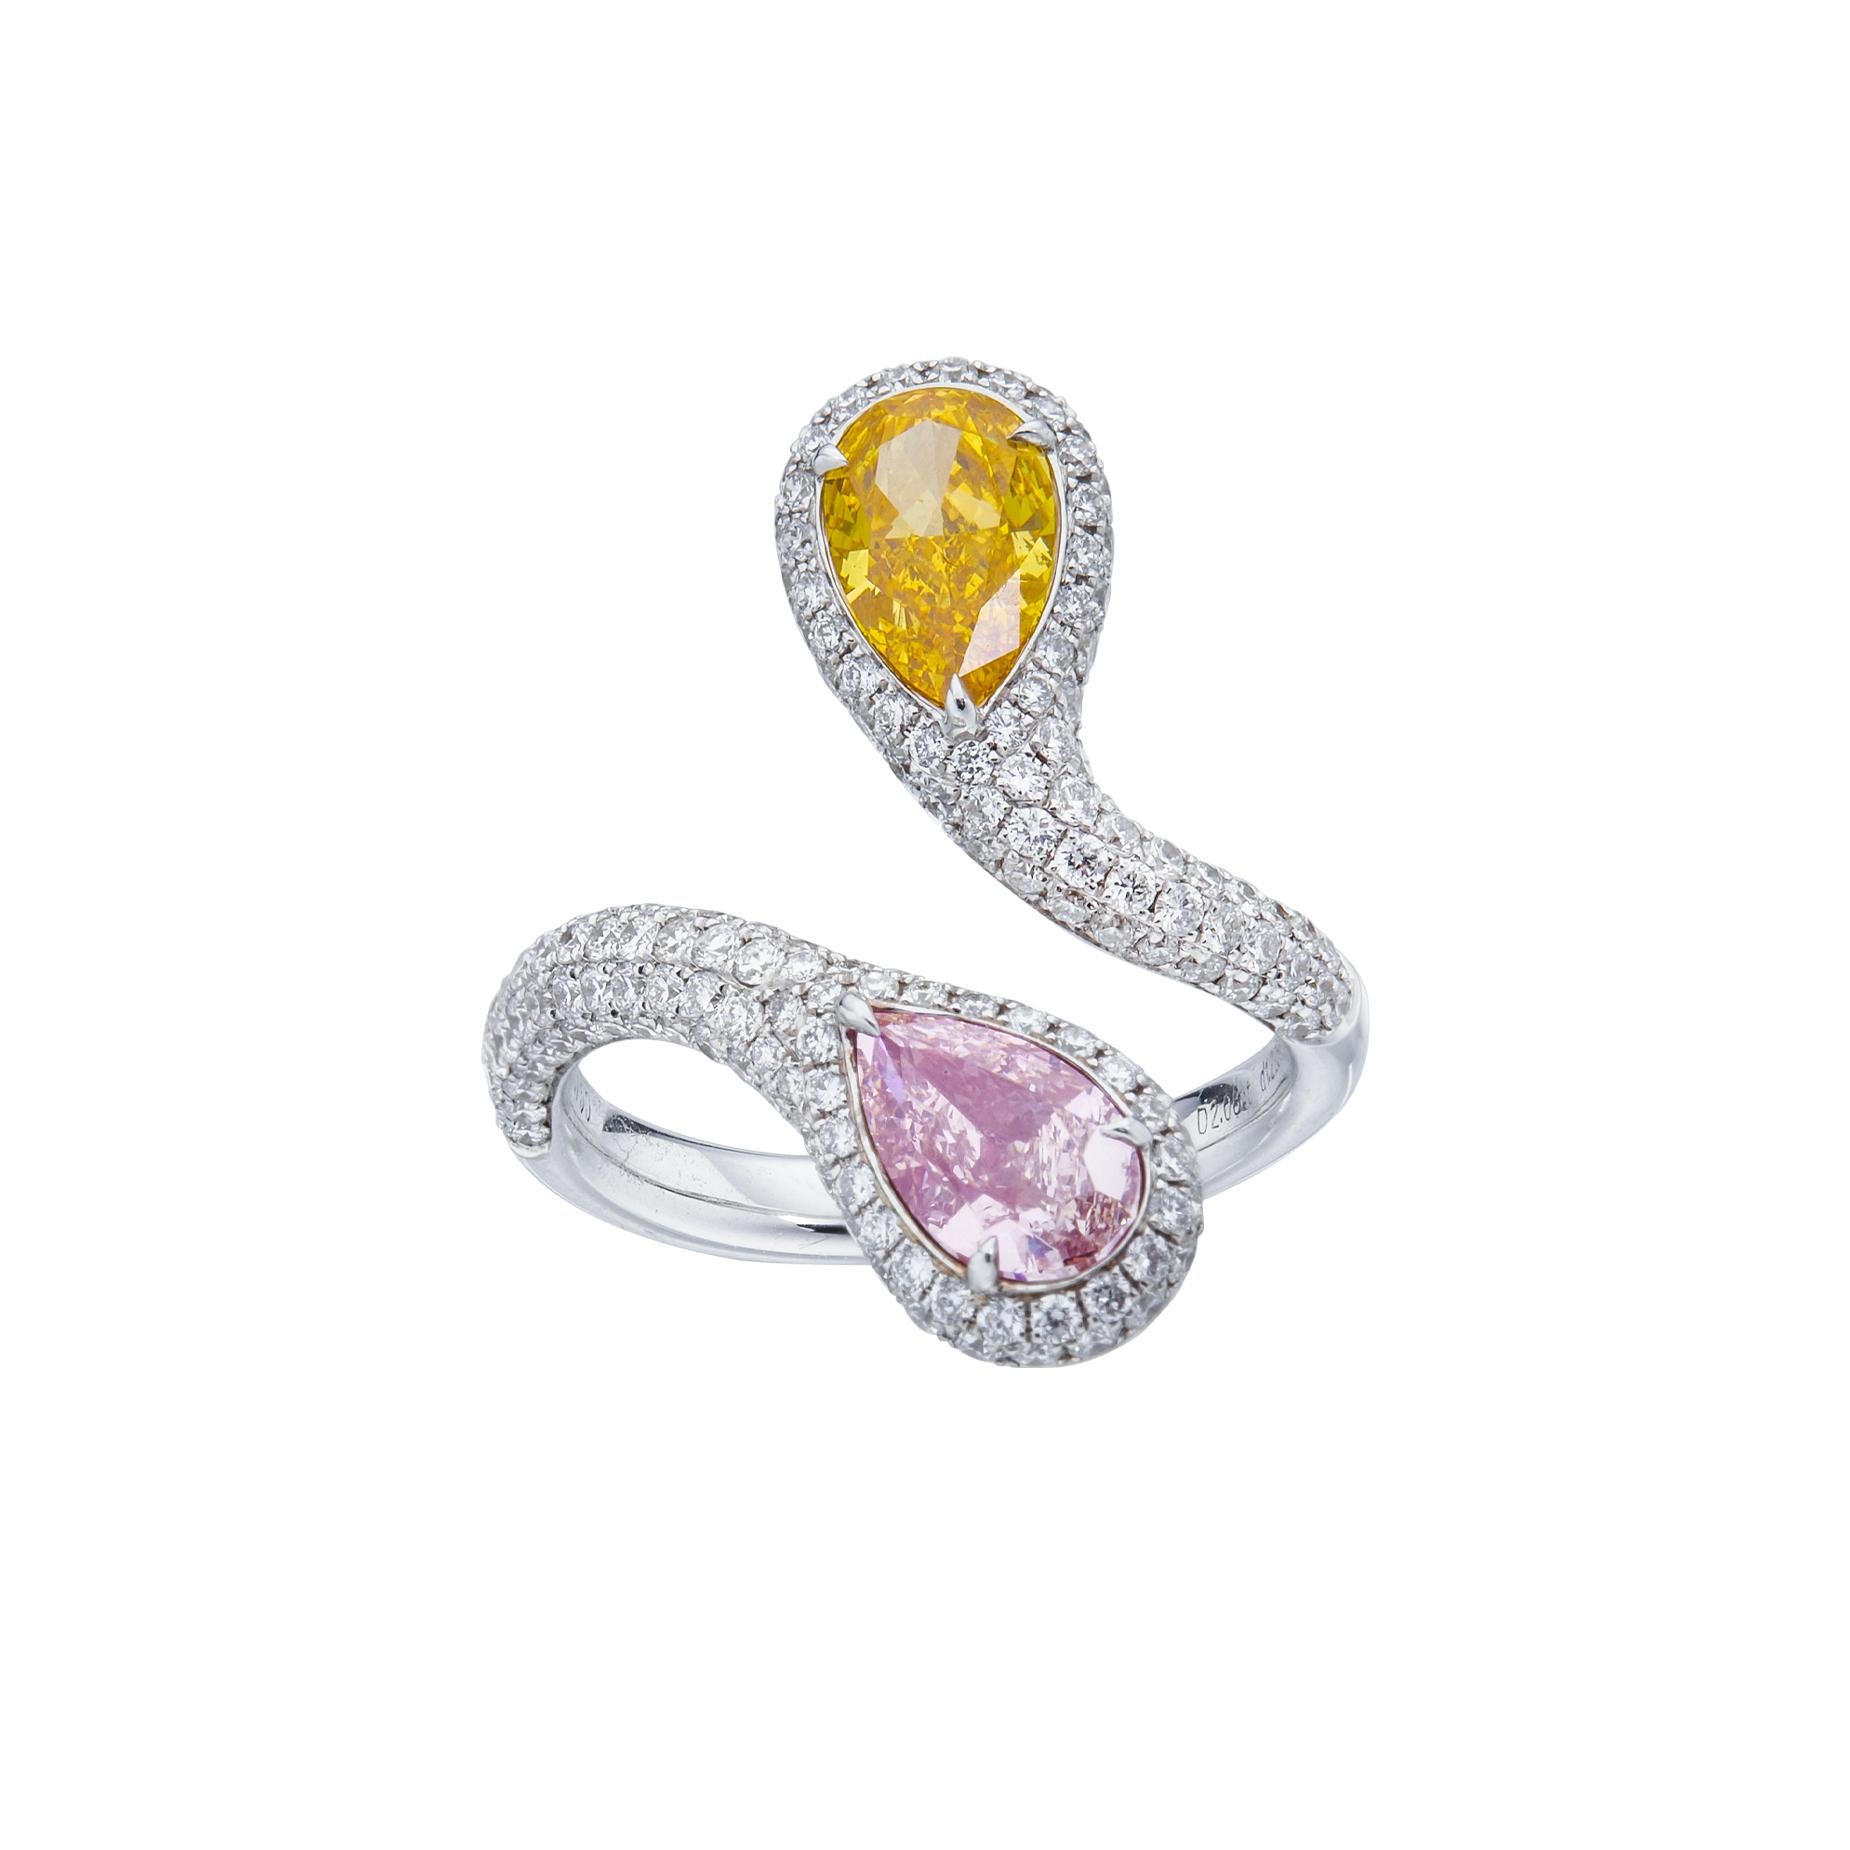 Cushion Cut Unique 4 colour GIA Certified natural pear shape diamond ring on 18kt gold.  For Sale